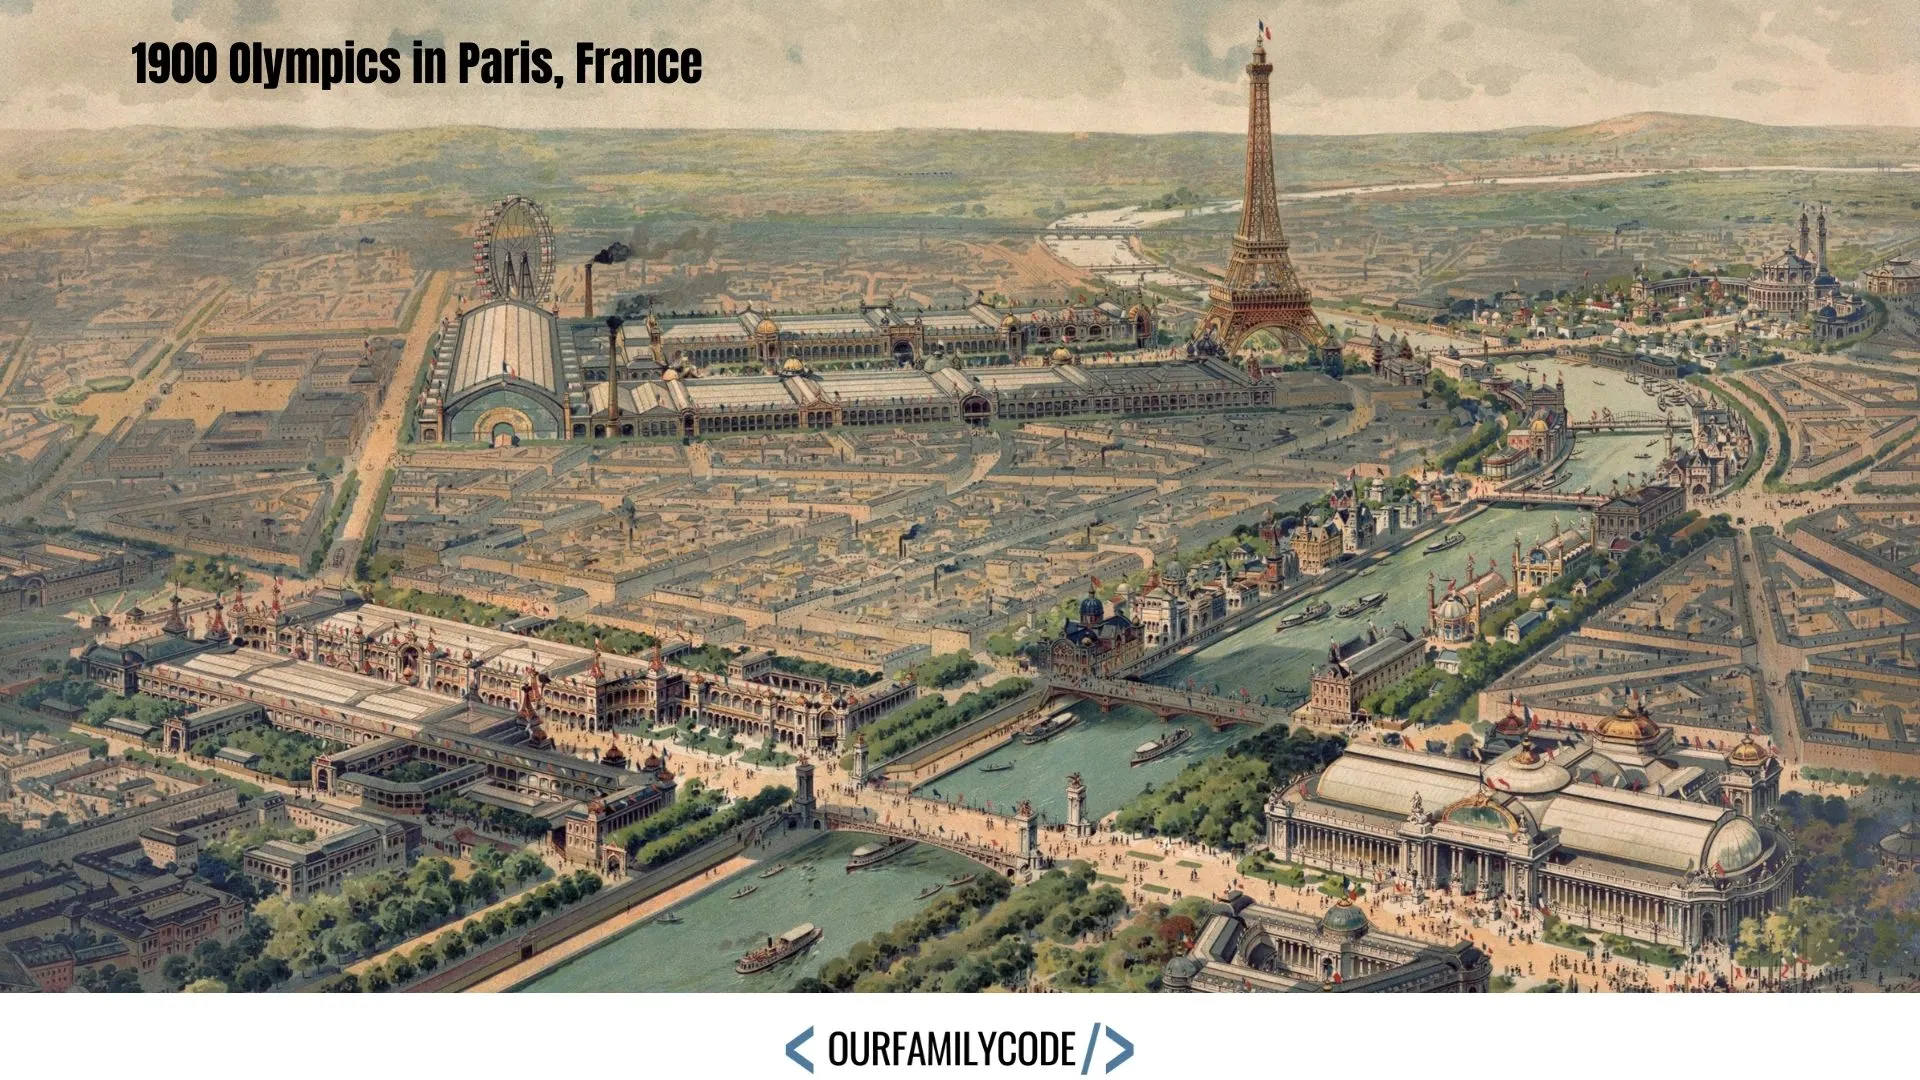 A Panoramic view of the Universal Exposition in Paris in 1900. The Everett Collection.